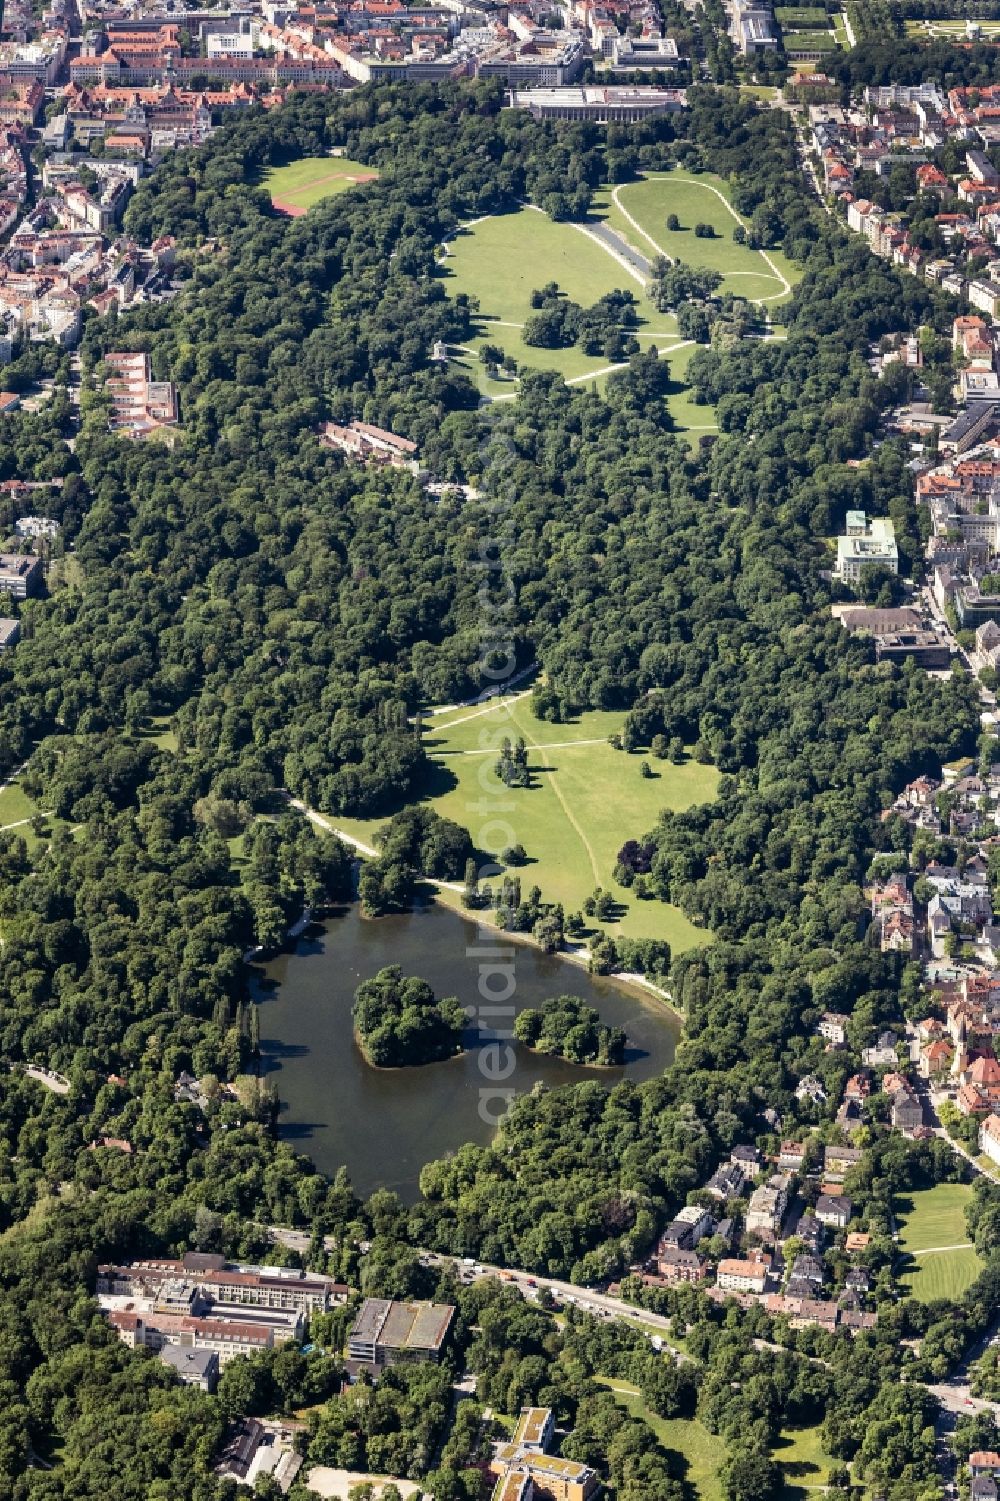 München from the bird's eye view: The leisure area Englischer Garten (English Garden) in Munich in the state of Bavaria. The popular greens and open spaces of the park are mainly used in summer and are administrated by the Bavarian Administration of castles, gardens and lakes. The English Garden is on of the largest inner city parks in the world